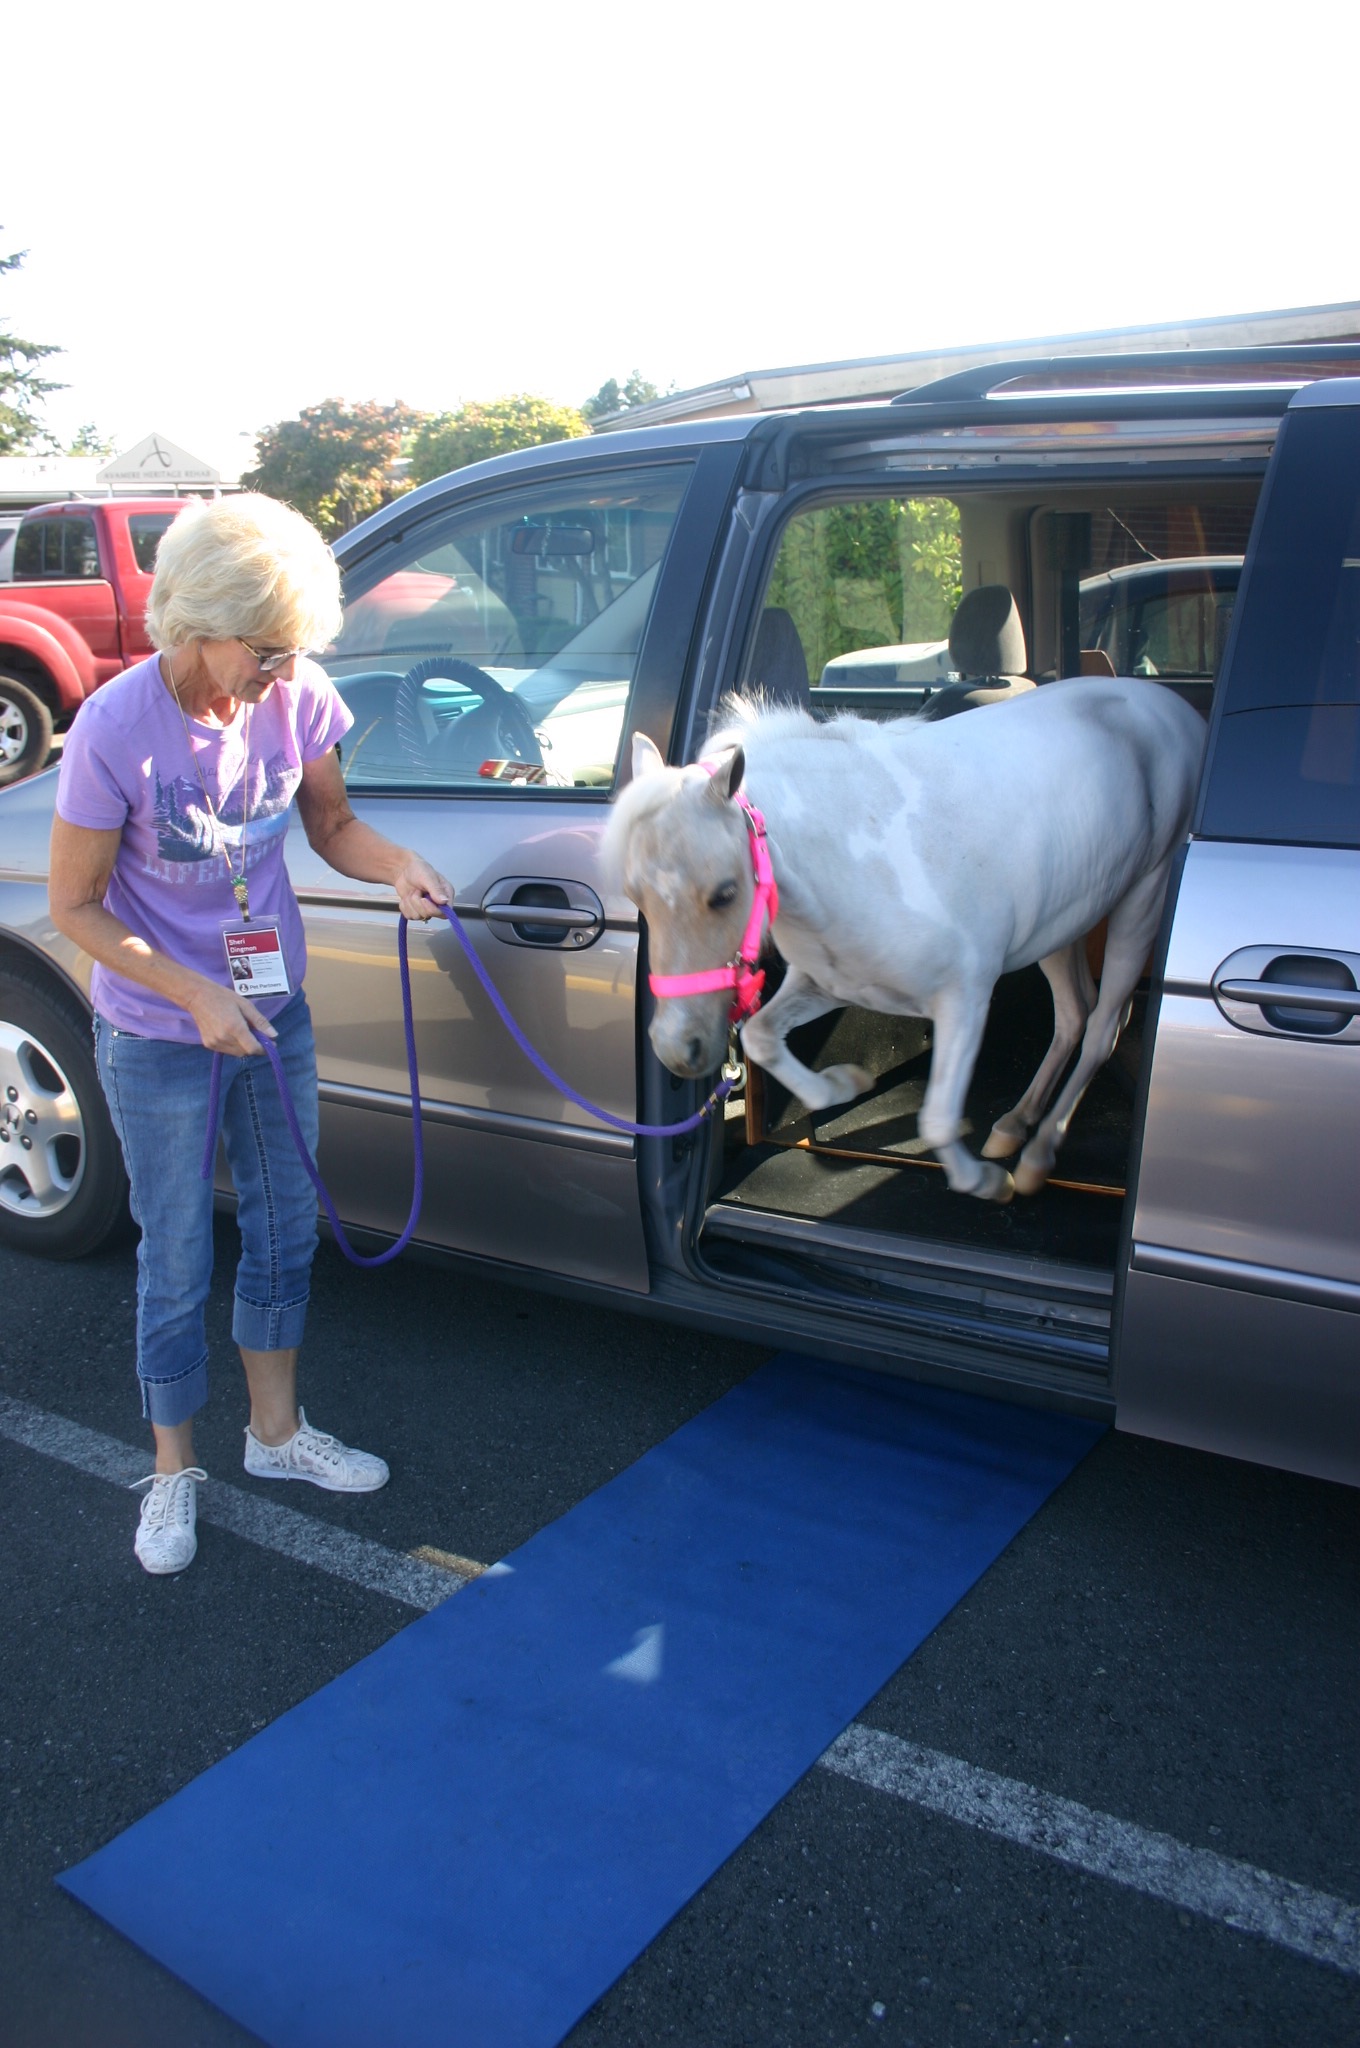 Sheri Dingmon and her miniature horse Drama get ready to visit residents at a Tacoma rehabilitation facility, Aug. 19, 2016. Credit: David Guest, TDI